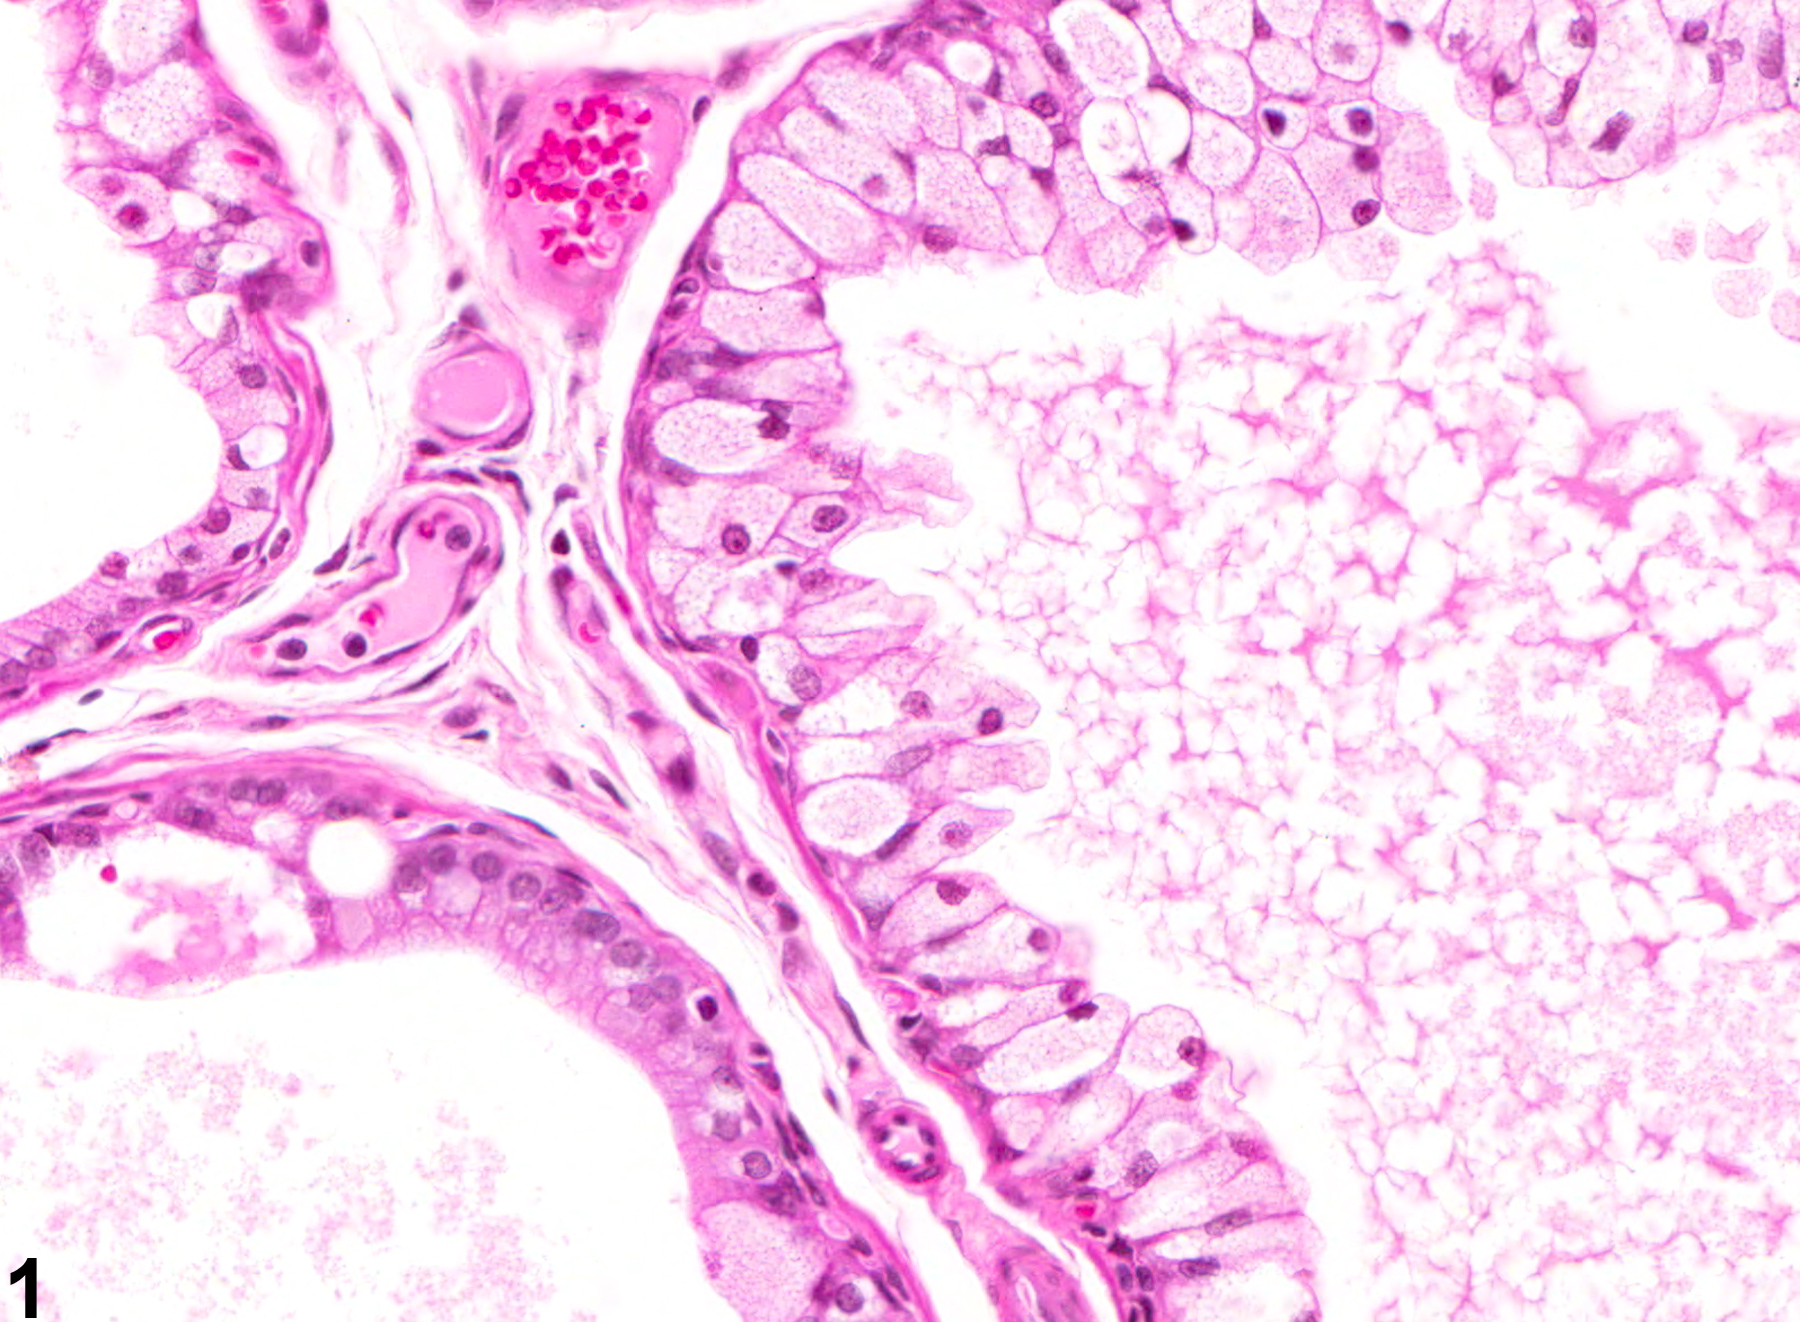 Image of epithelial degeneration in the prostate from a male F344/N rat in a chronic study